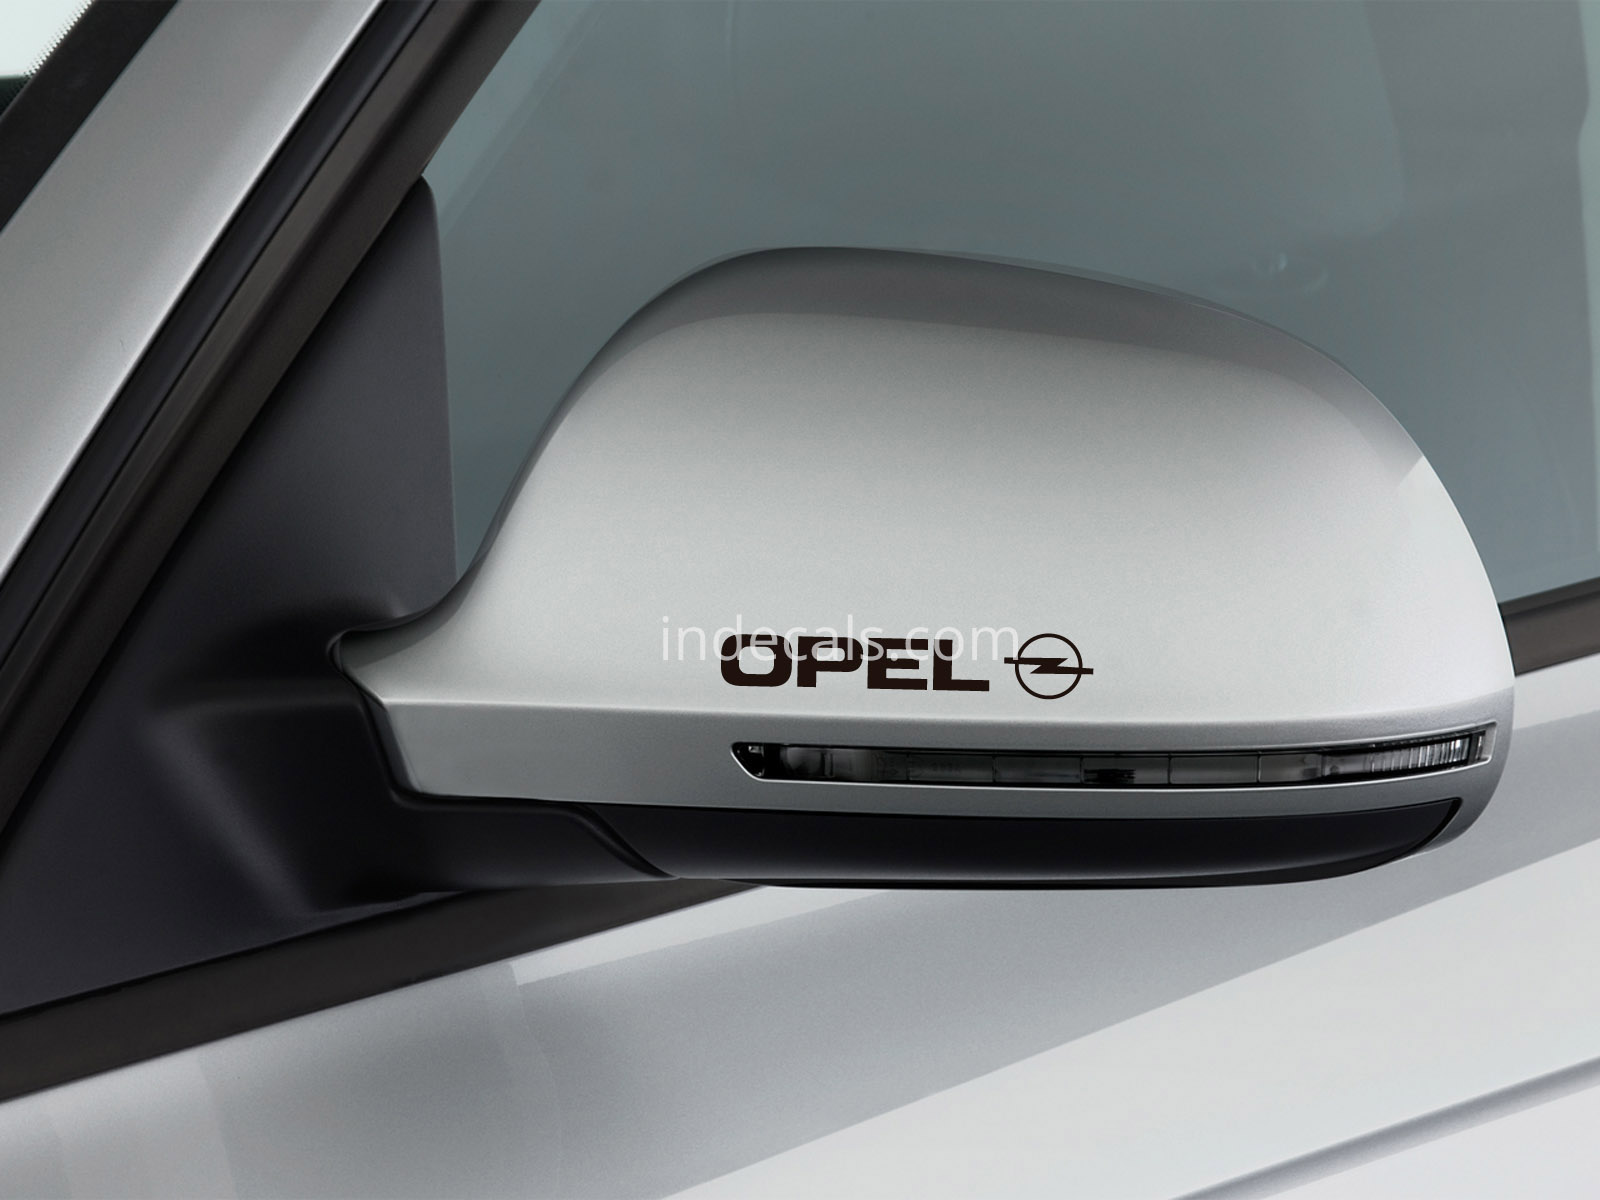 3 x Opel Stickers for Mirrors - Black